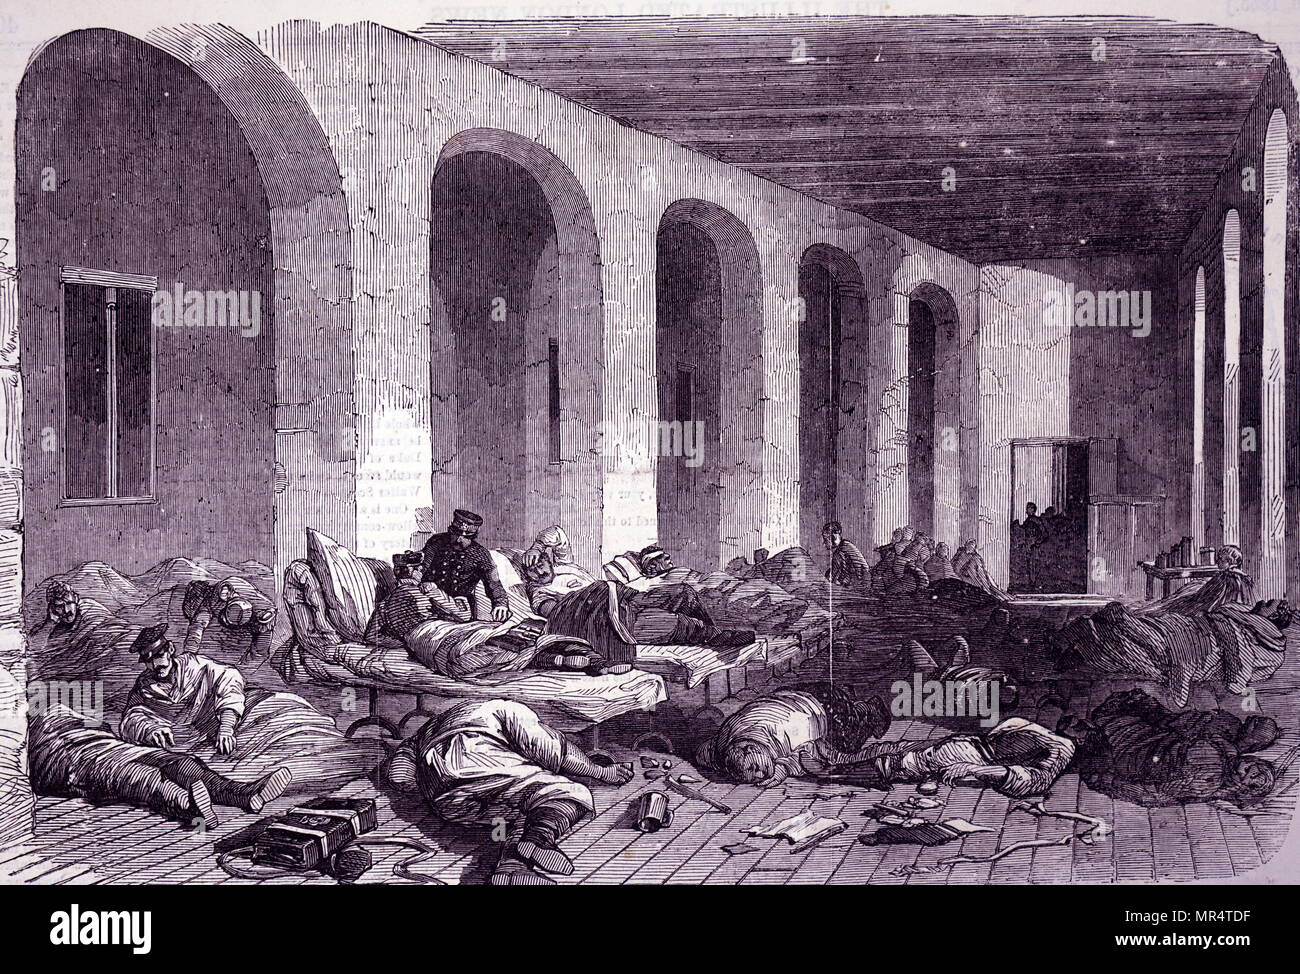 Engraving depicting the interior of a Russian military hospital, Sebastopol, during the Crimean War. Dated 19th century Stock Photo